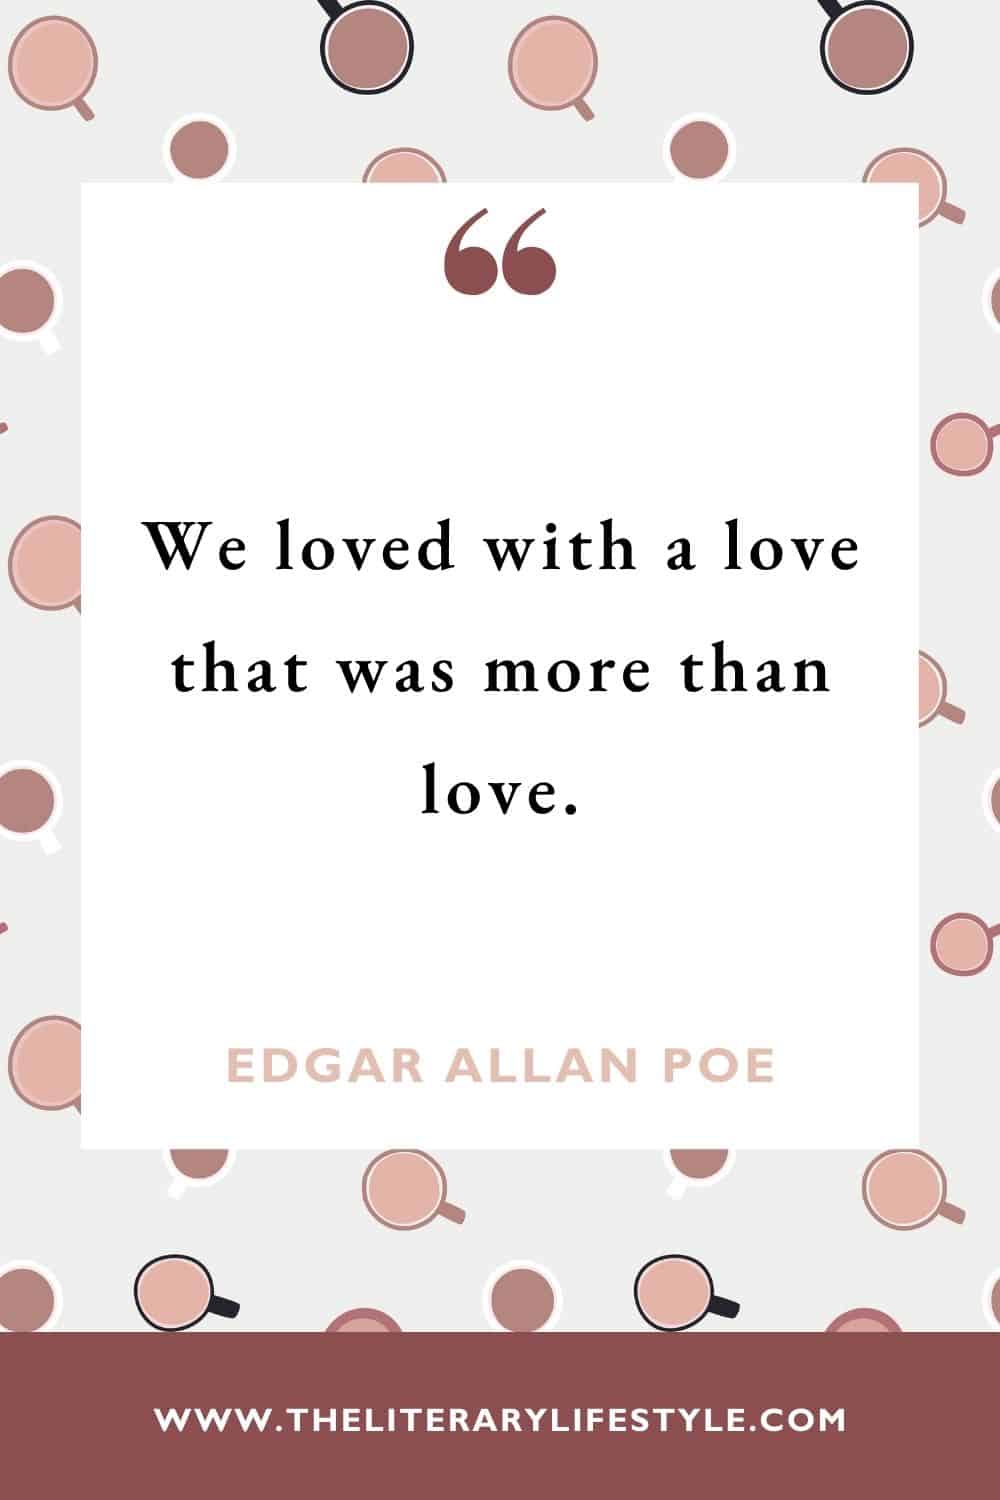 edgar allan poe love quote from annabel lee